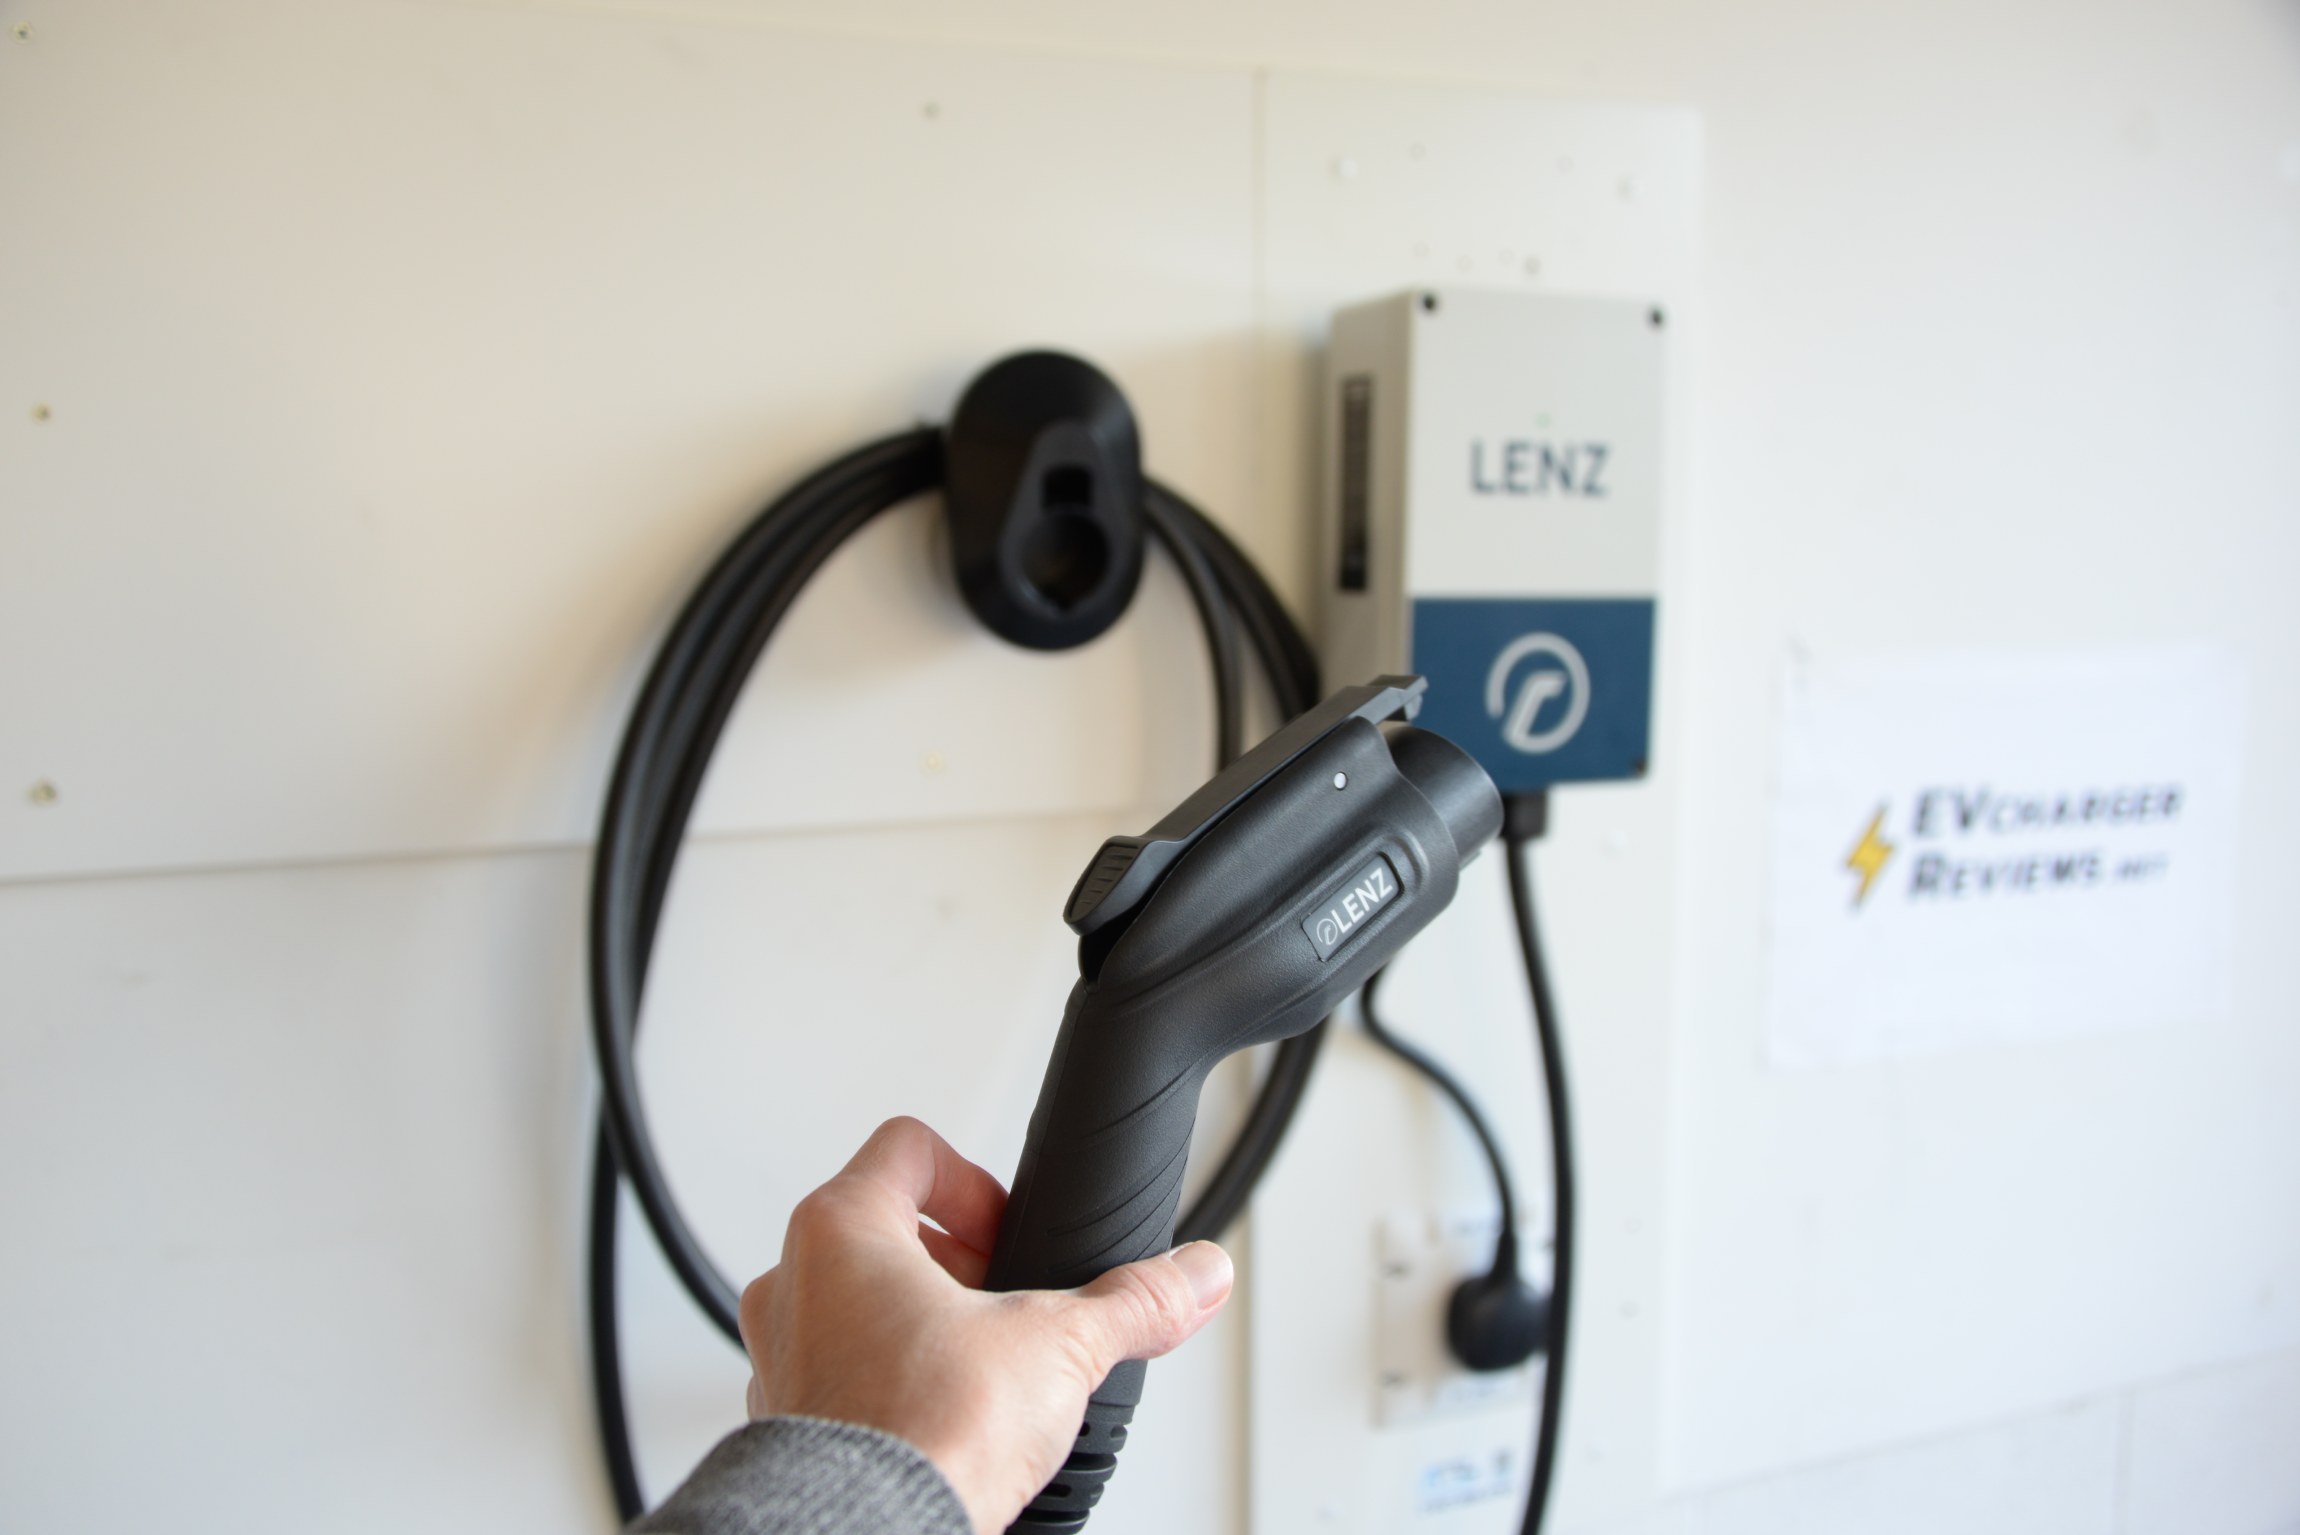 LENZ Level 2 EV charger and J1772 connector